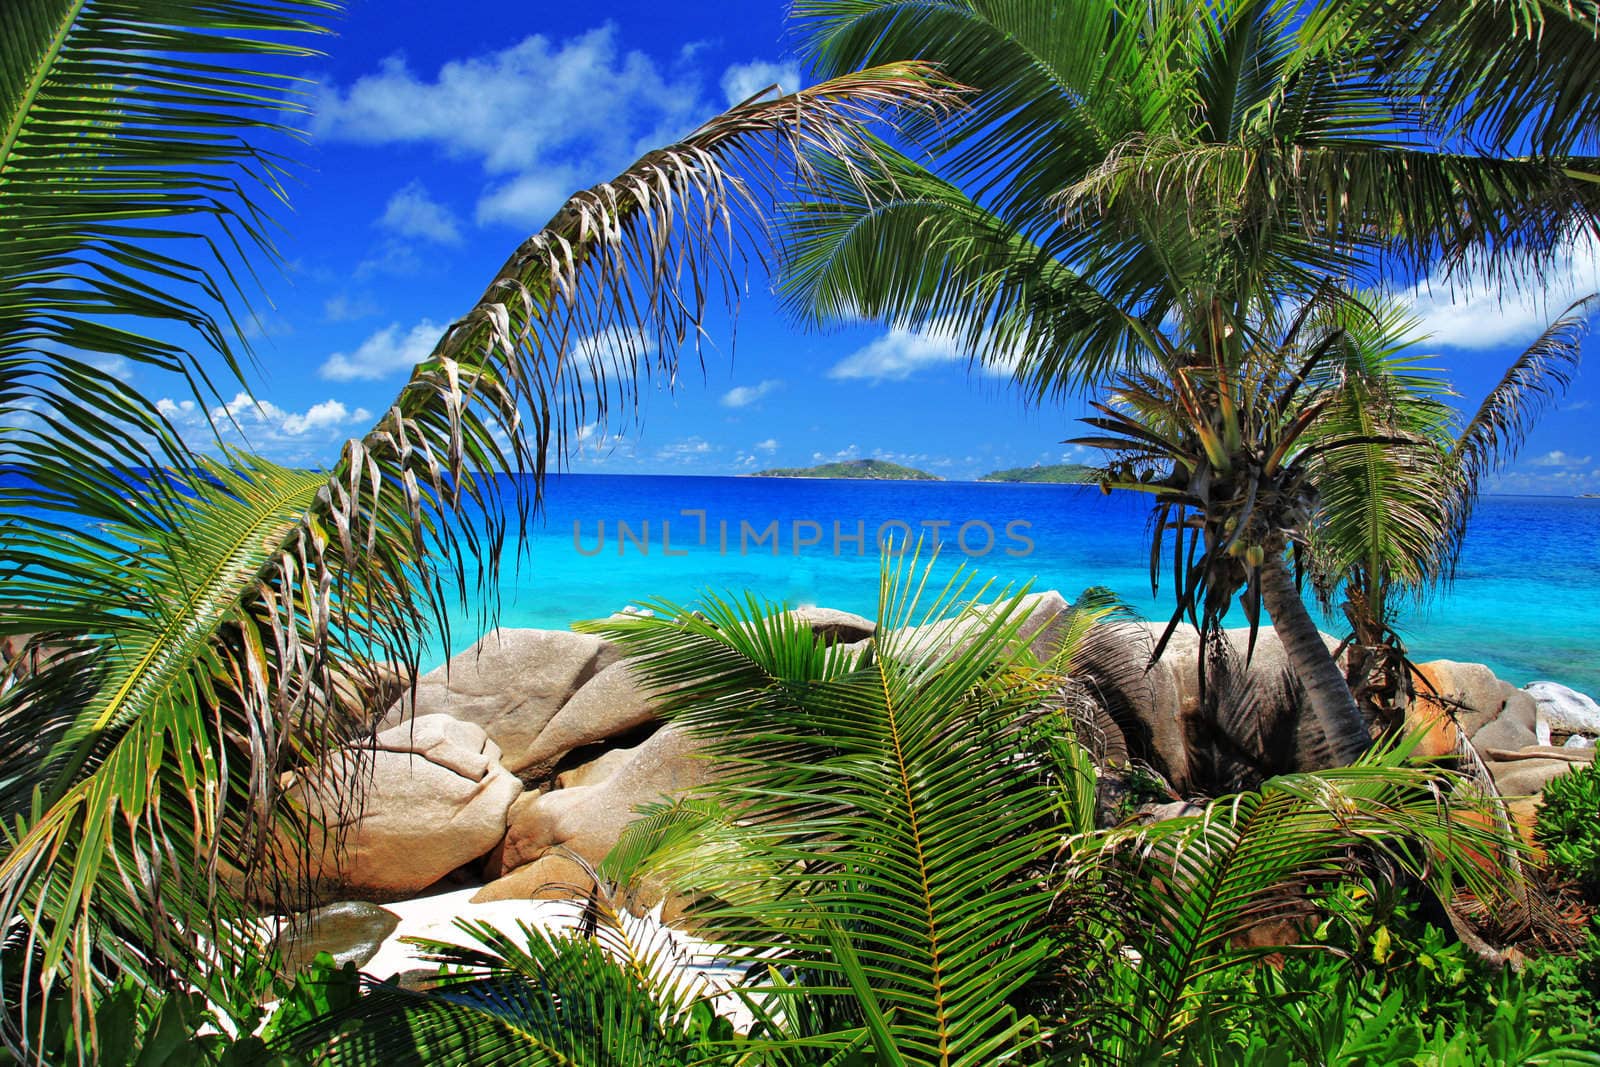 Marvellous beach with palm trees in the foreground - horizontally